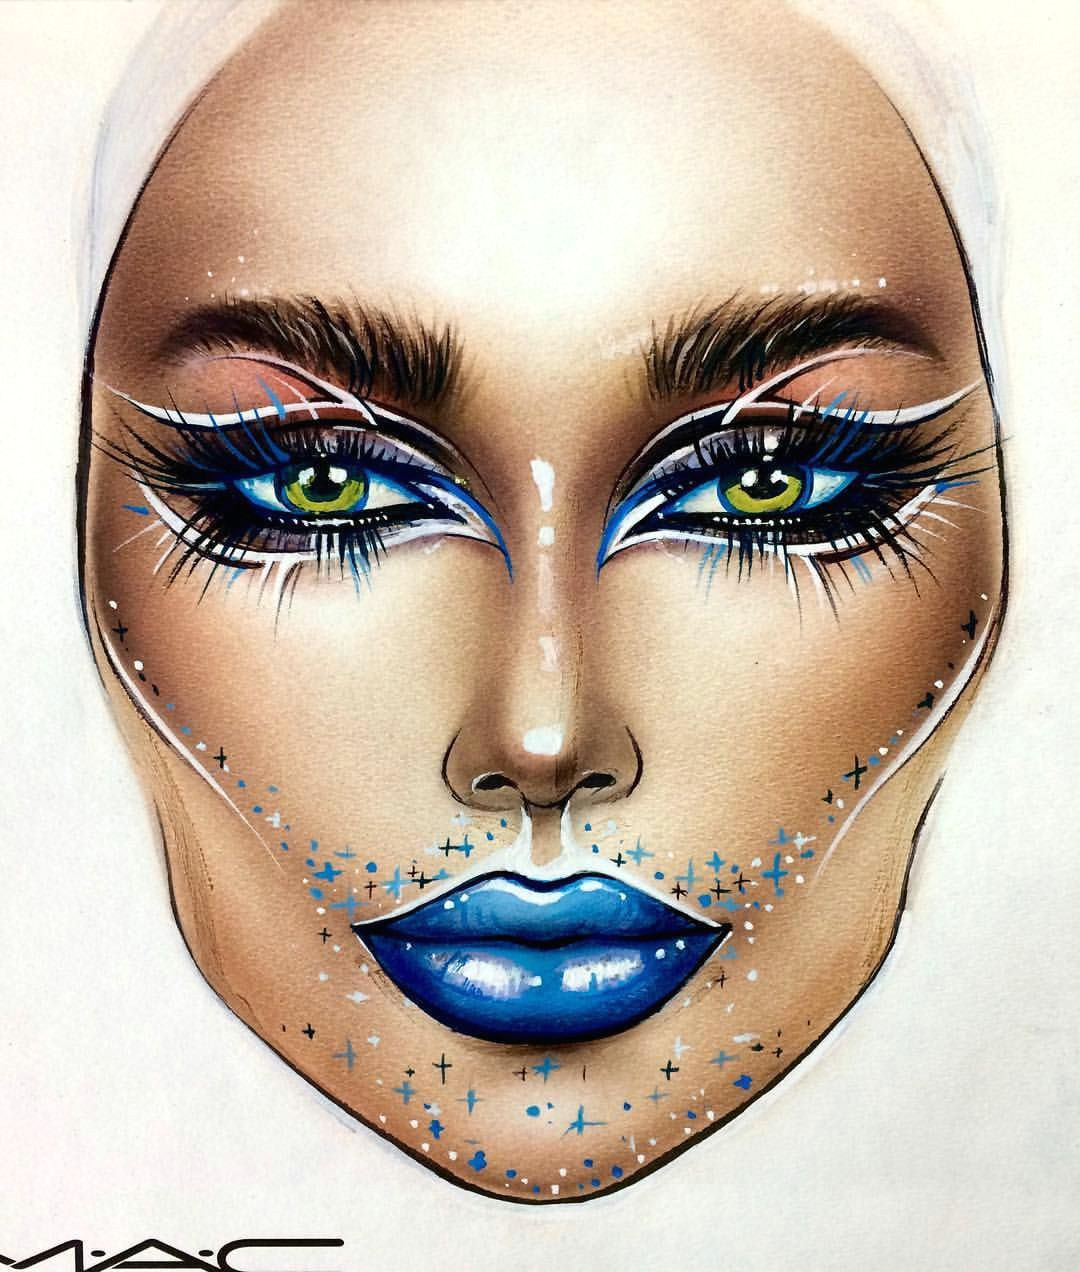 Drawing Eye Makeup On Hand Pin by Cheyanne Braun On Face Chart Inspirations In 2019 Makeup